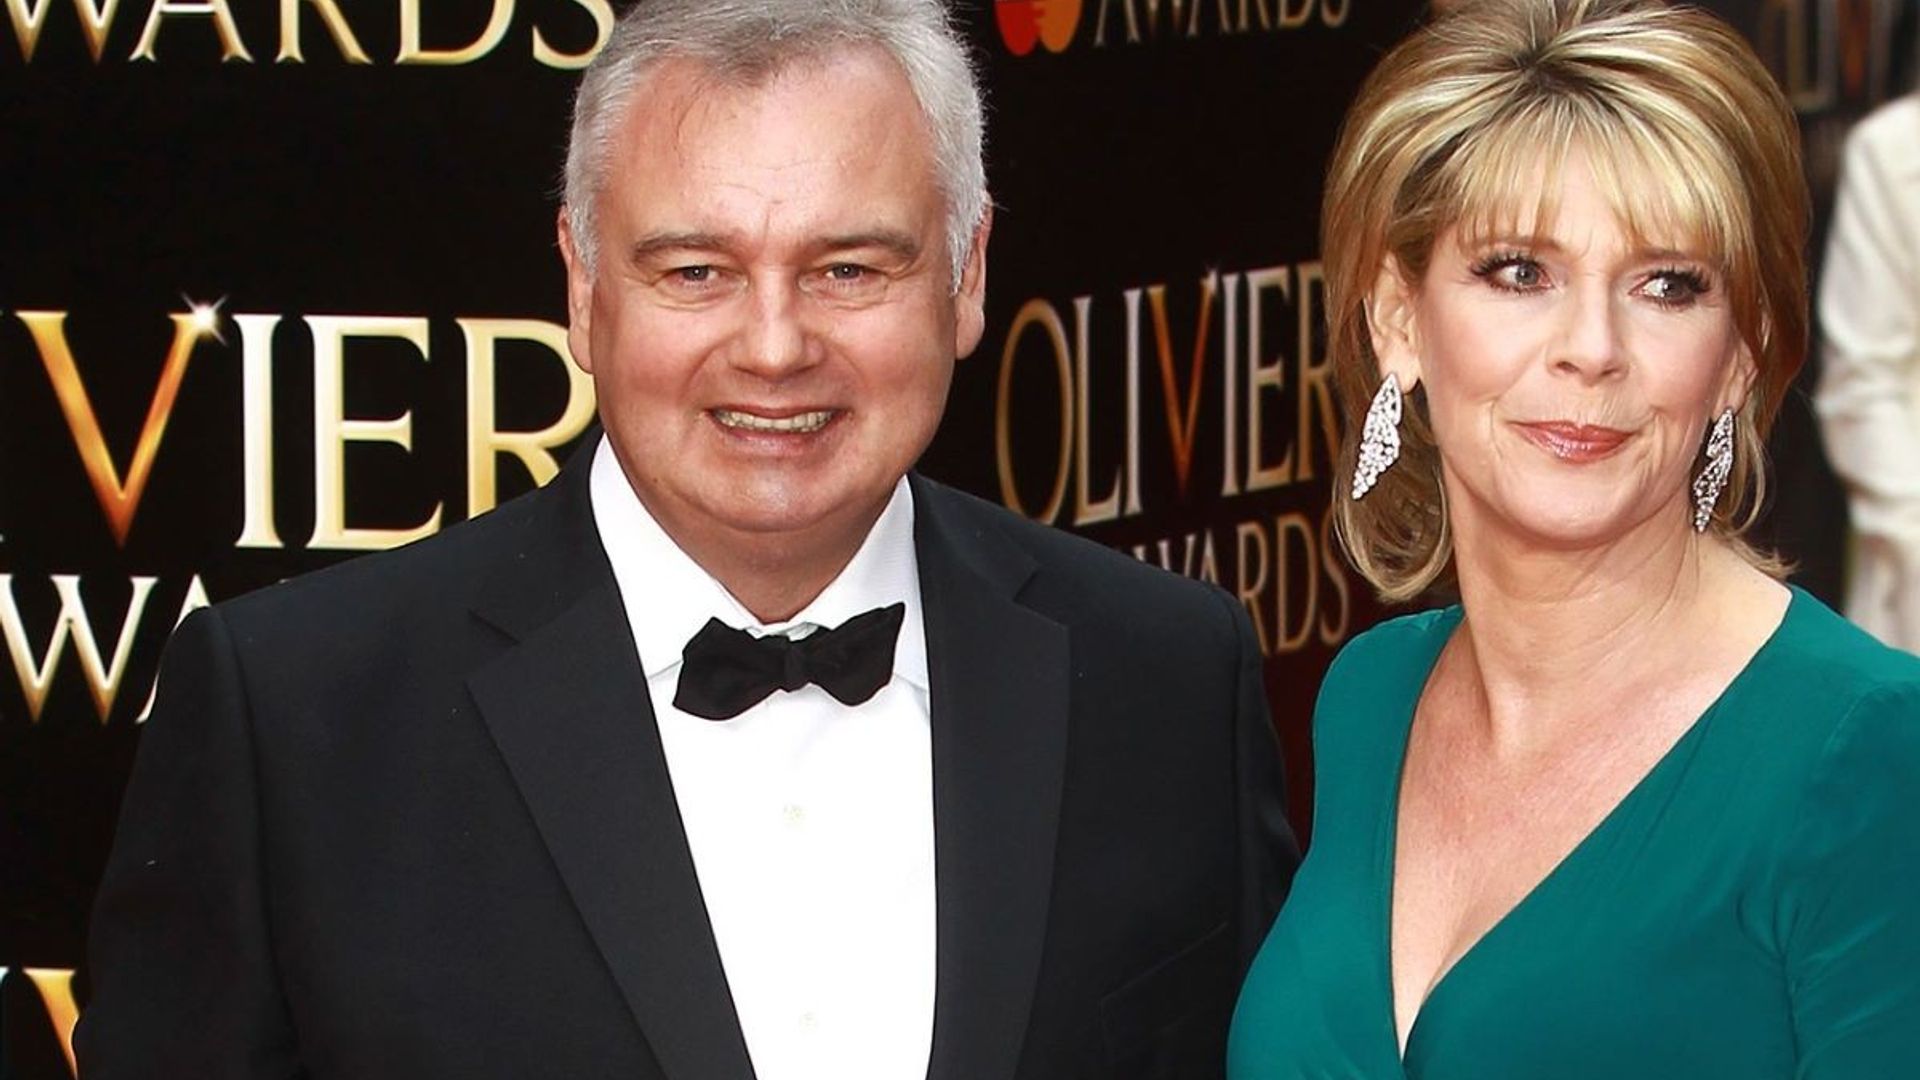 Ruth Langsford returns to social media after Eamonn Holmes' 'snub' comments